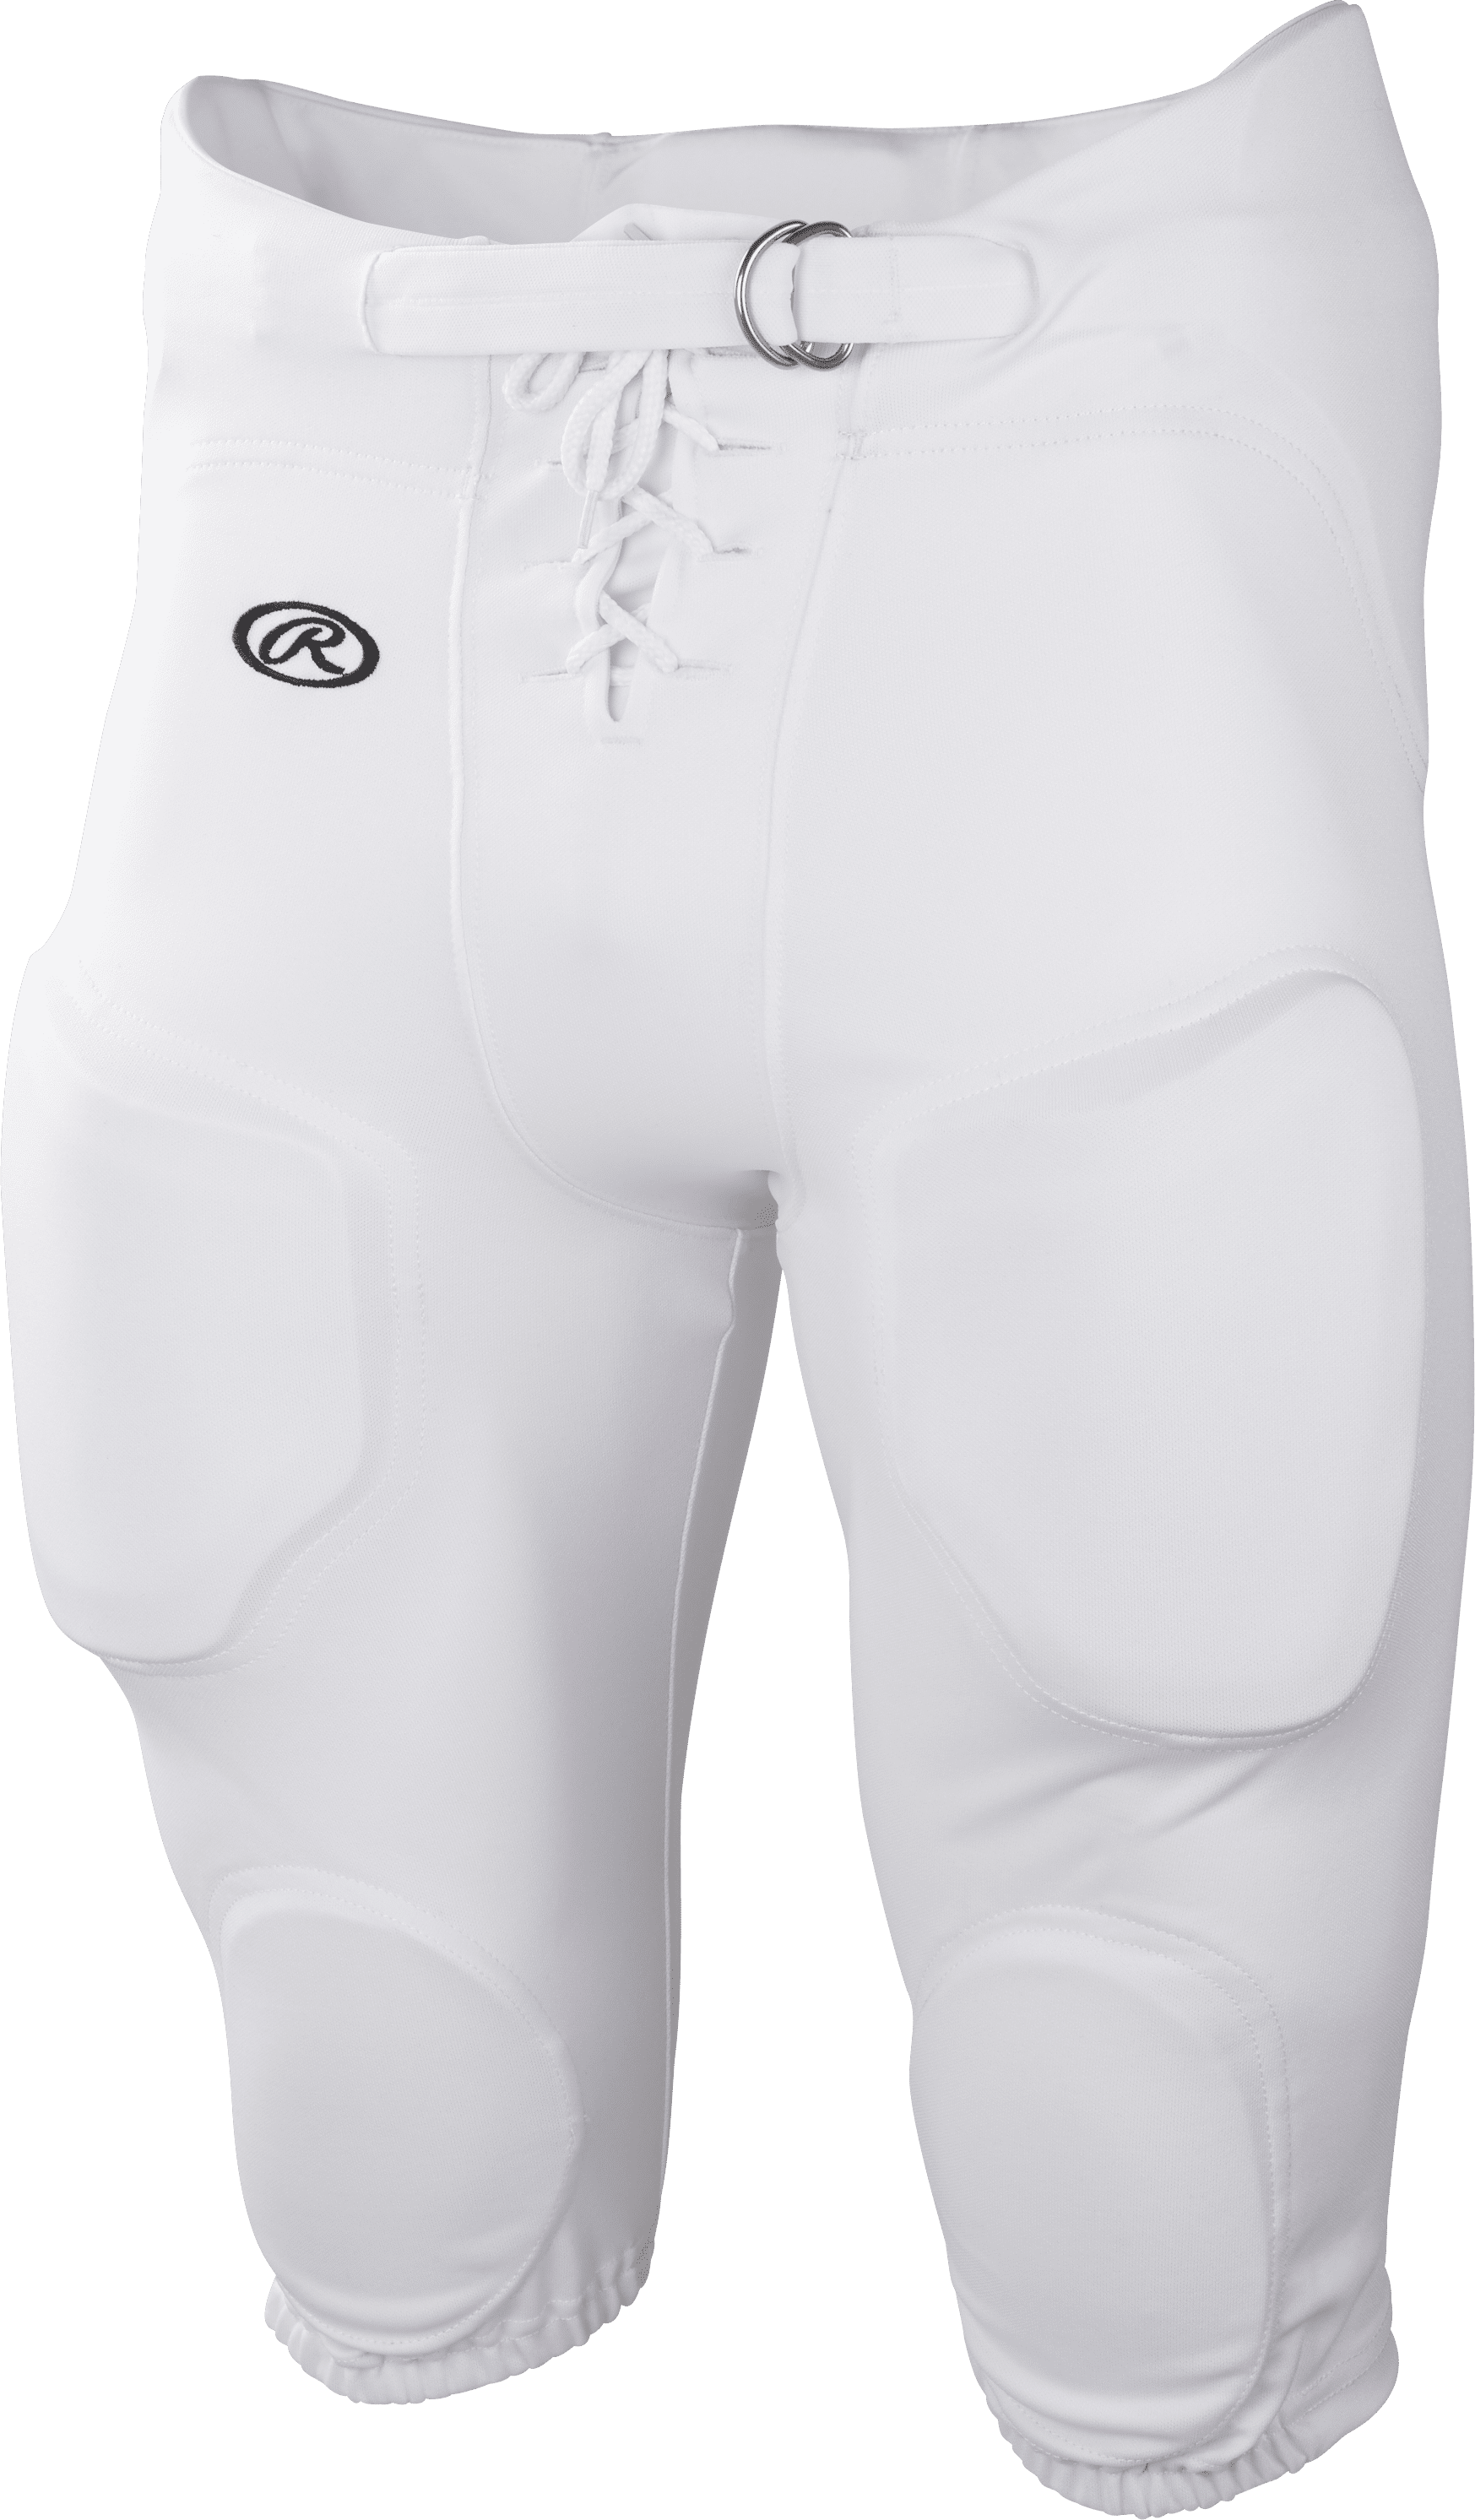 Rawlings Integrated Youth Boy's Practice/Game Football Pants With Pads F1500P